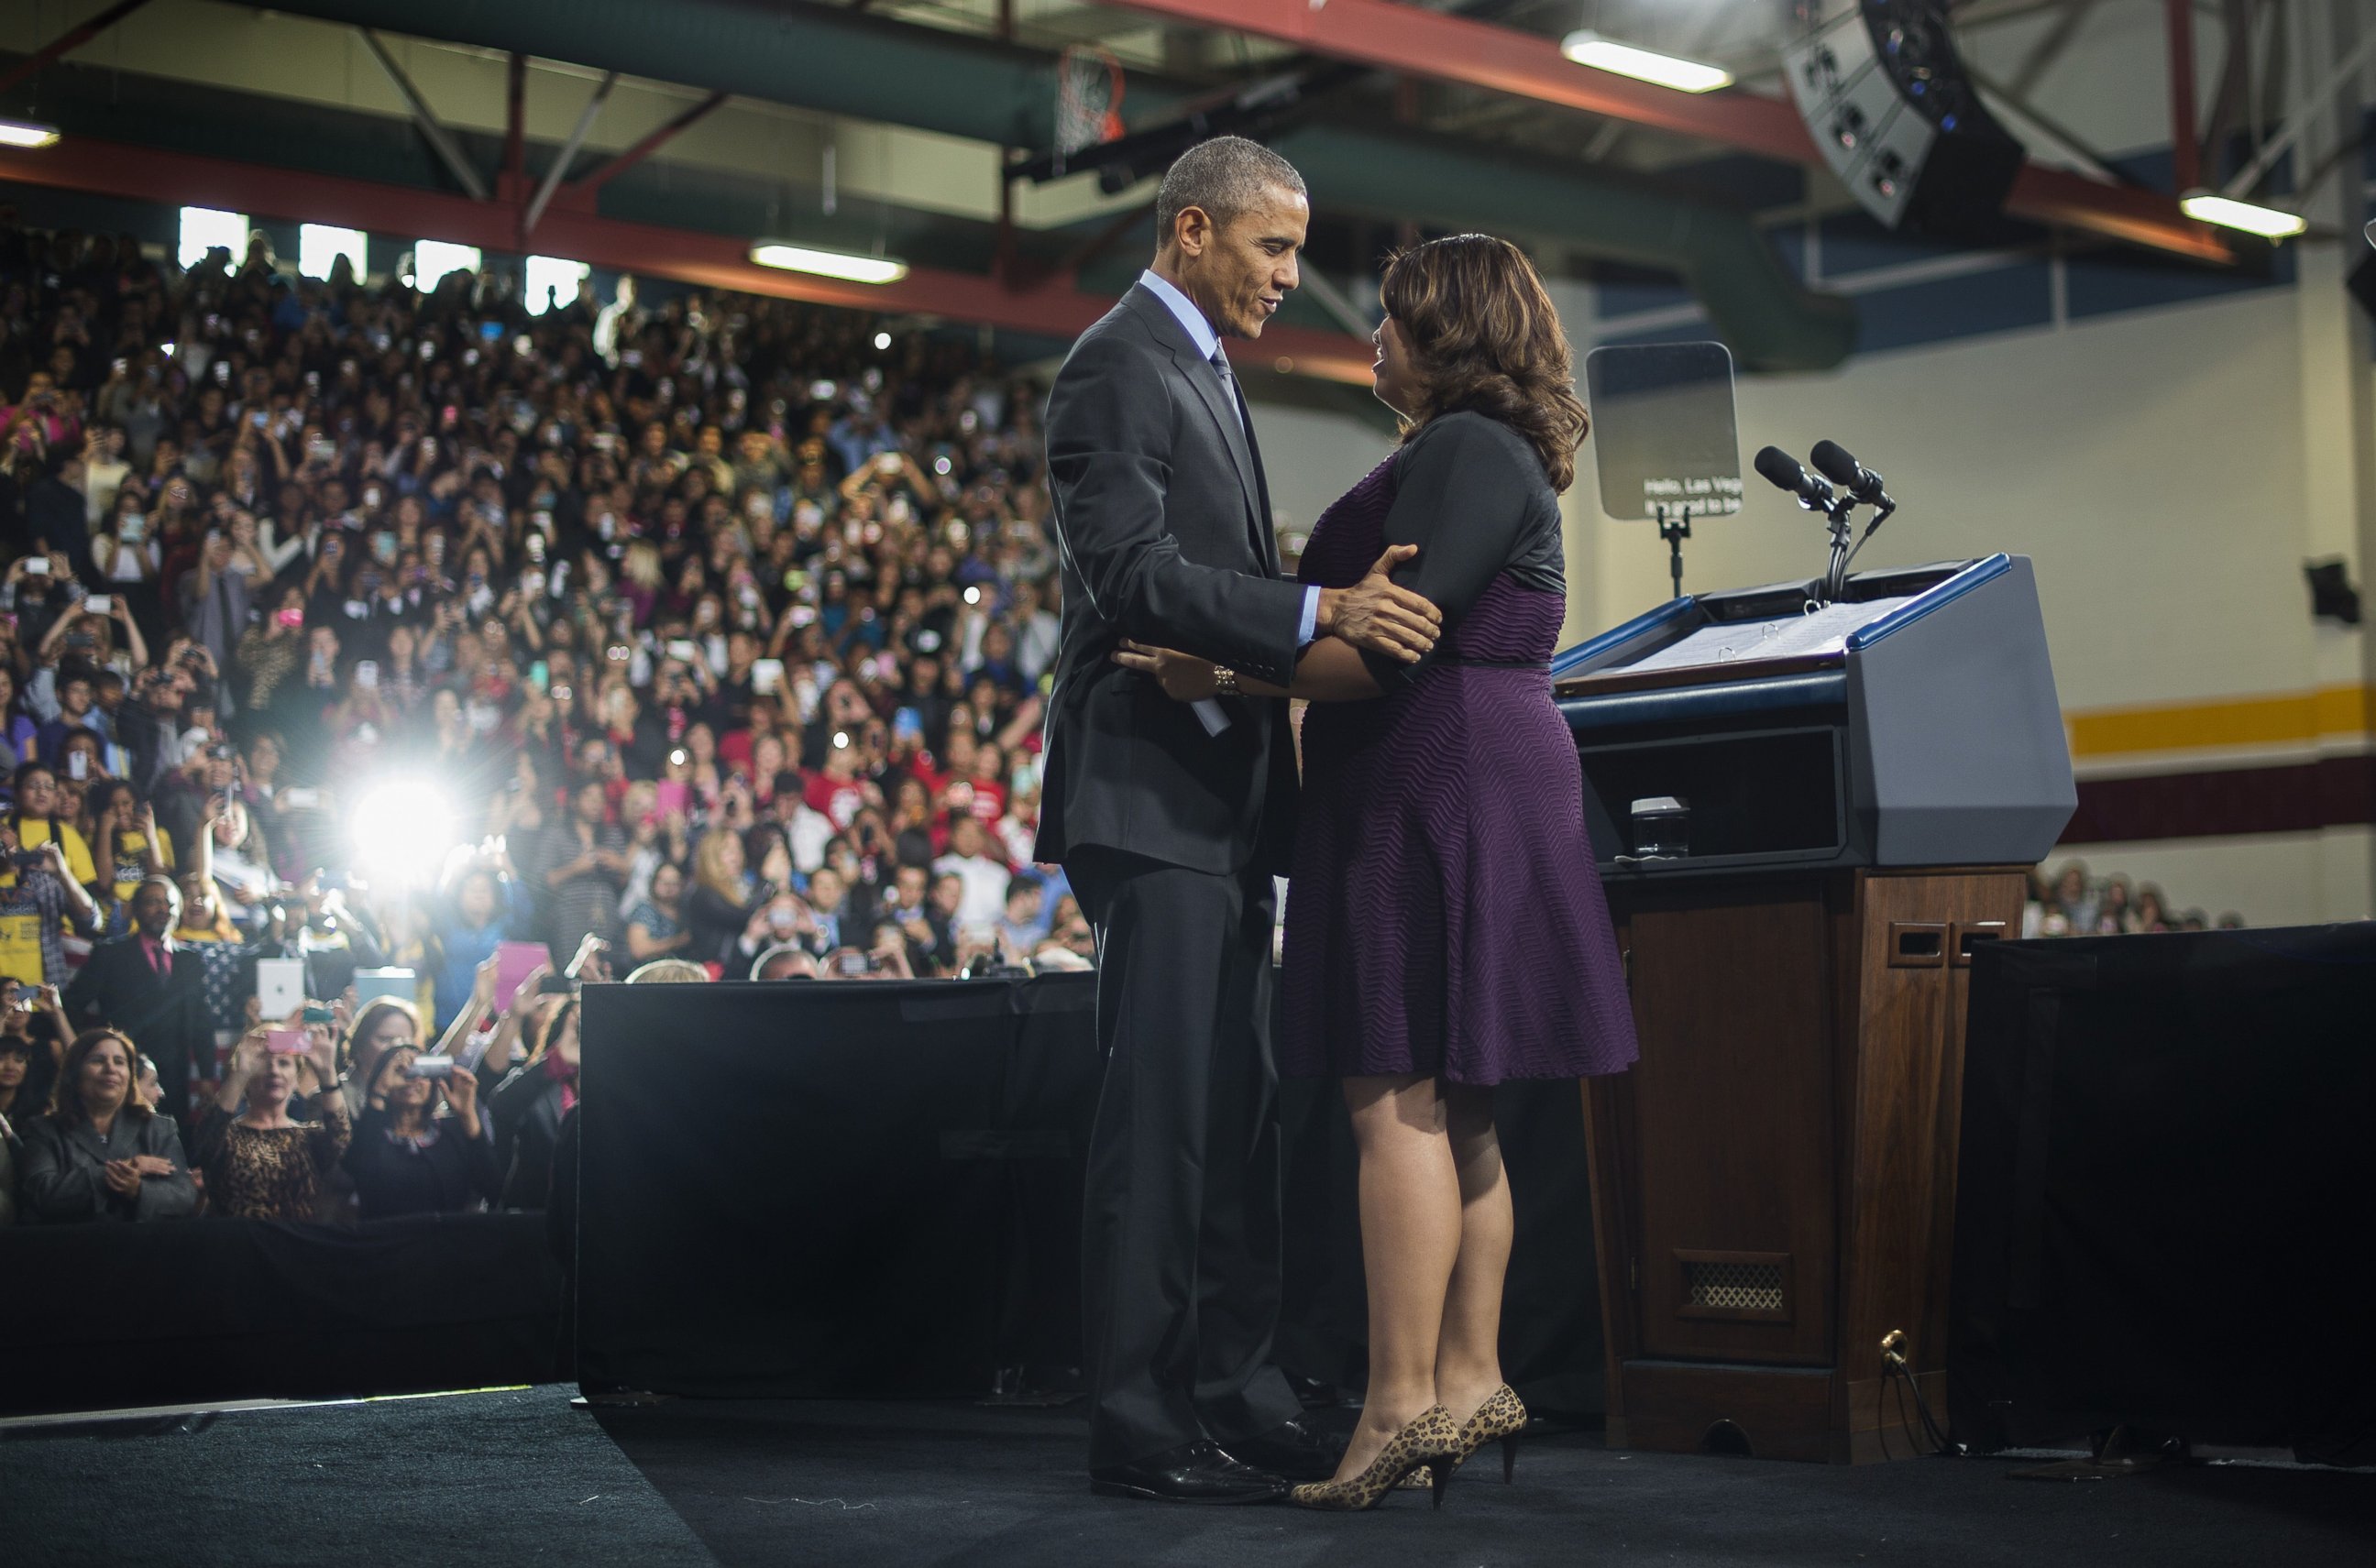 PHOTO: President Barack Obama hugs Astrid Silva, an activist, as he arrives to deliver remarks on the new steps he will be taking within his executive authority on immigration at Del Sol High School in Las Vegas, Nov. 21, 2014.